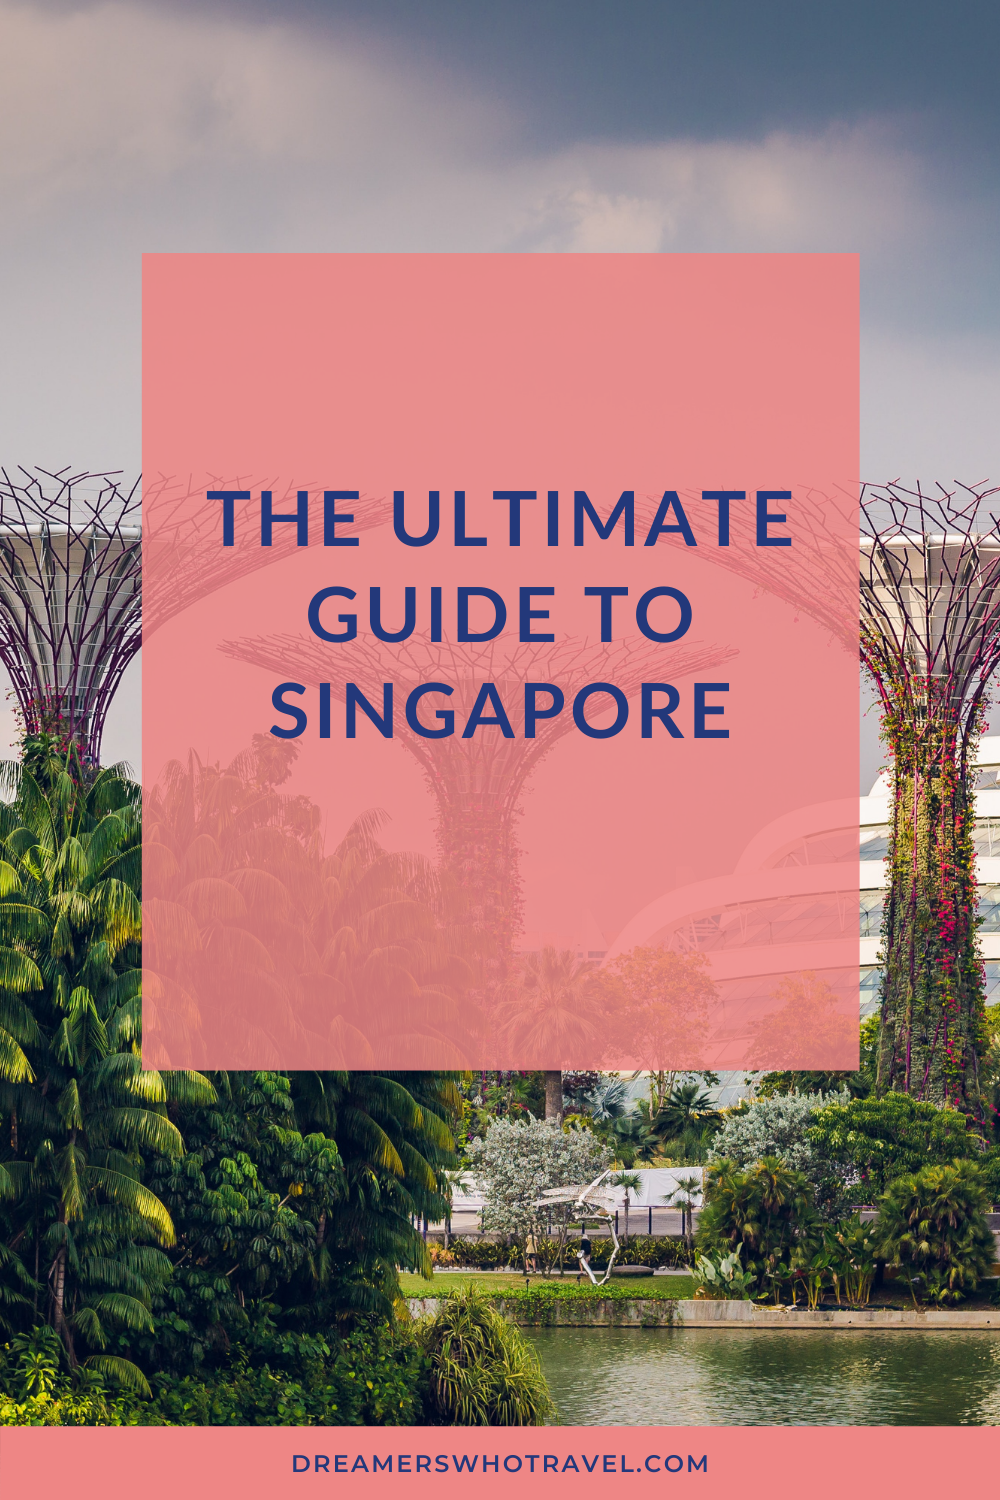 THE ULTIMATE GUIDE TO SINGAPORE